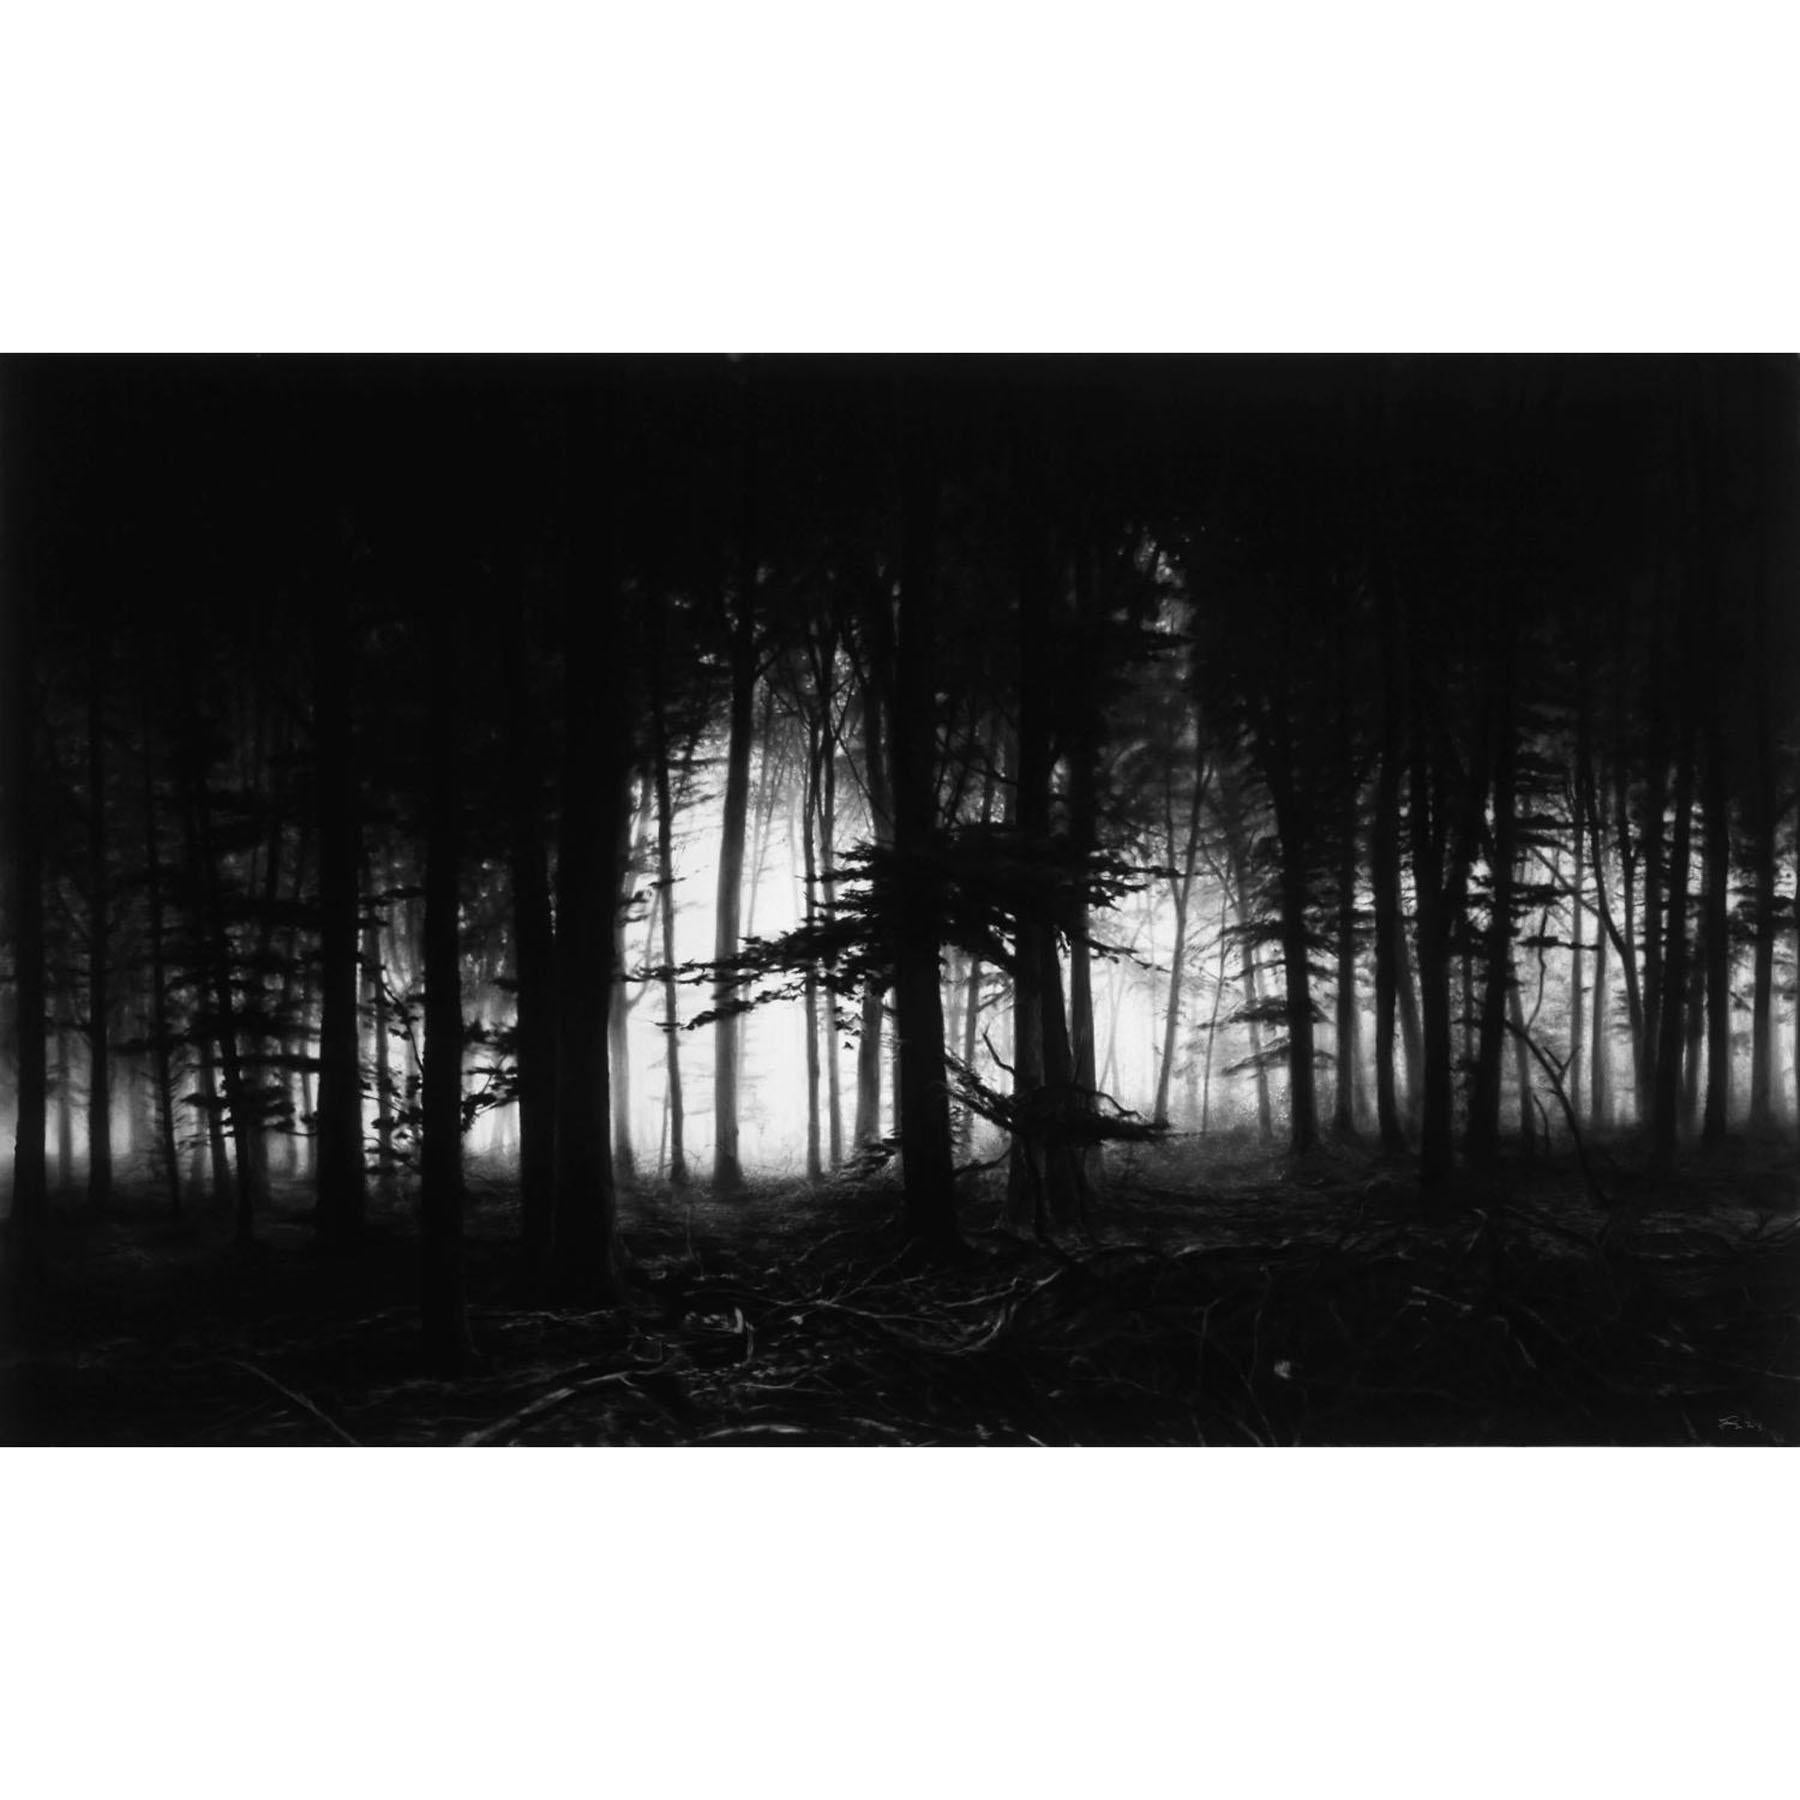 This mythological woodland hints at the enigma and emotions of nature with a masterful use of chiaroscuro.

Robert Longo, Forest of Doxa
Contemporary, 21st Century, Pigment Print, Limited Edition
Pigment print
Edition of 25
93,4 x 151,7 cm (36.7 x